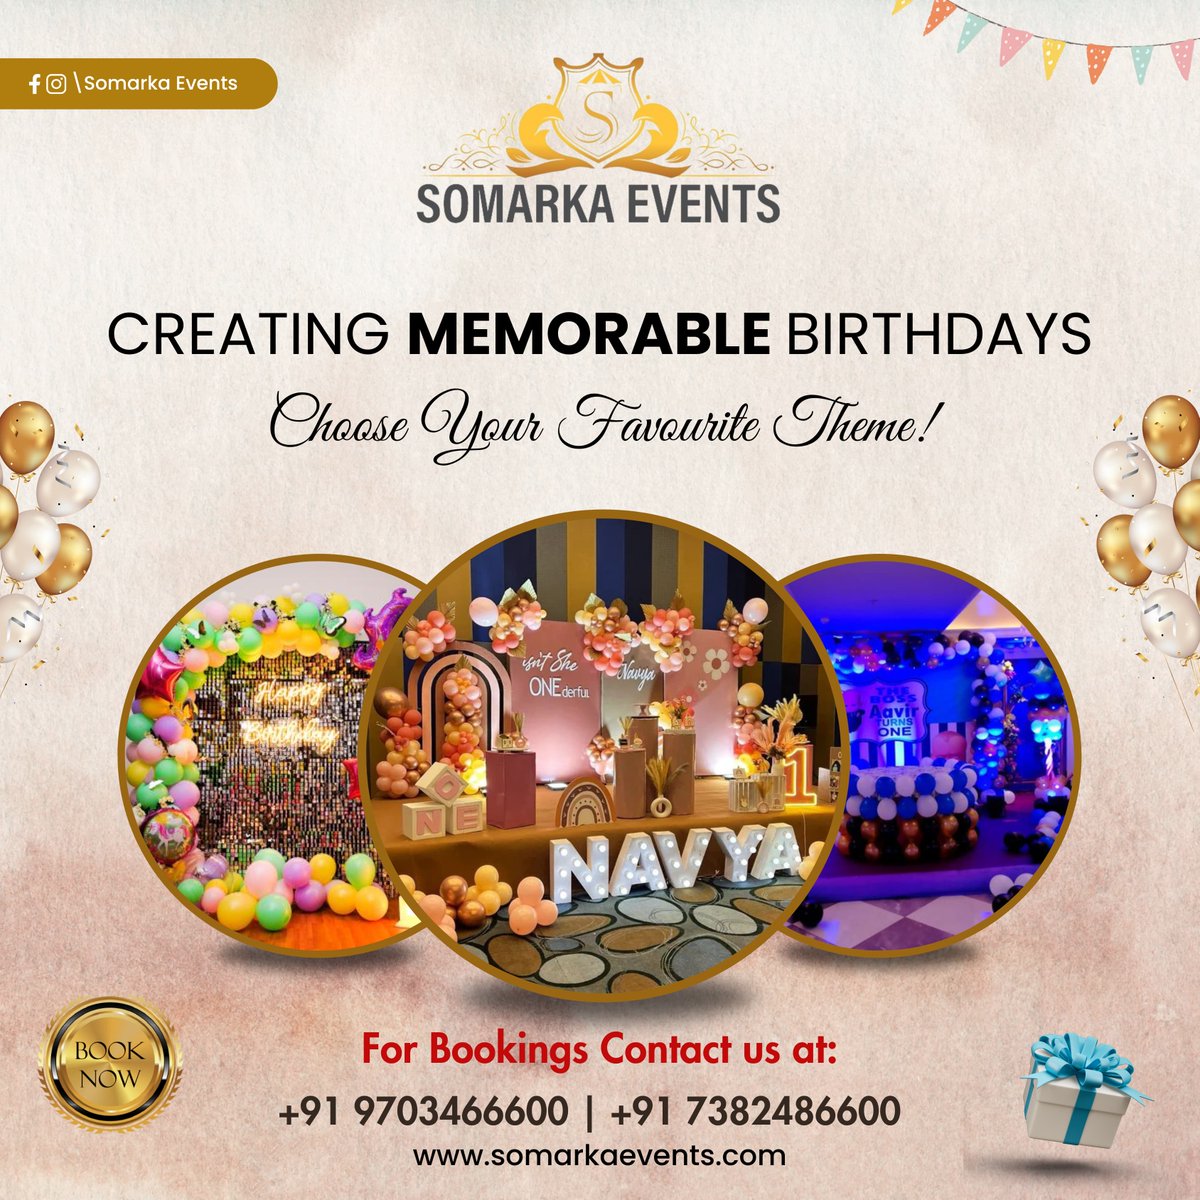 We specialize in designing  theme birthday parties that capture the essence of joy and imagination from whimsical fairy-tale settings to superhero showdowns.

📞 Contact Us: +91 97034 66600 | +91 73824 86600

#SomarkaEvents #BestEventDesigners #BestEventOrganisation #BestEvent